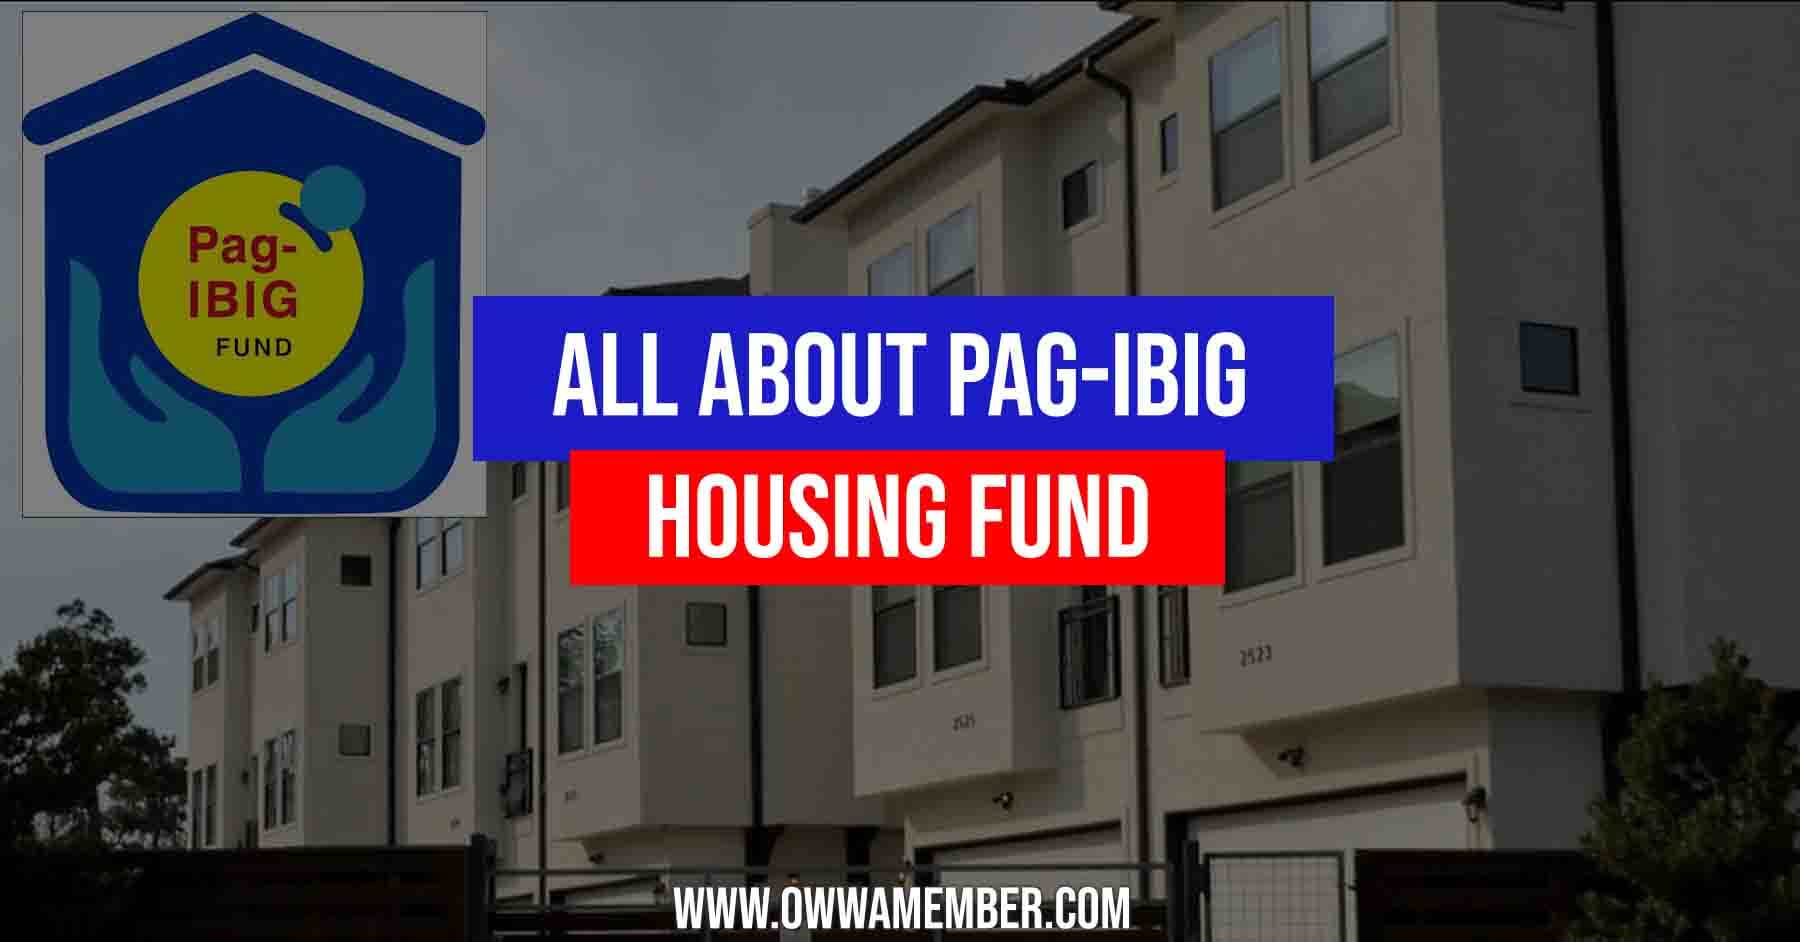 pag-ibig housing fund philippines